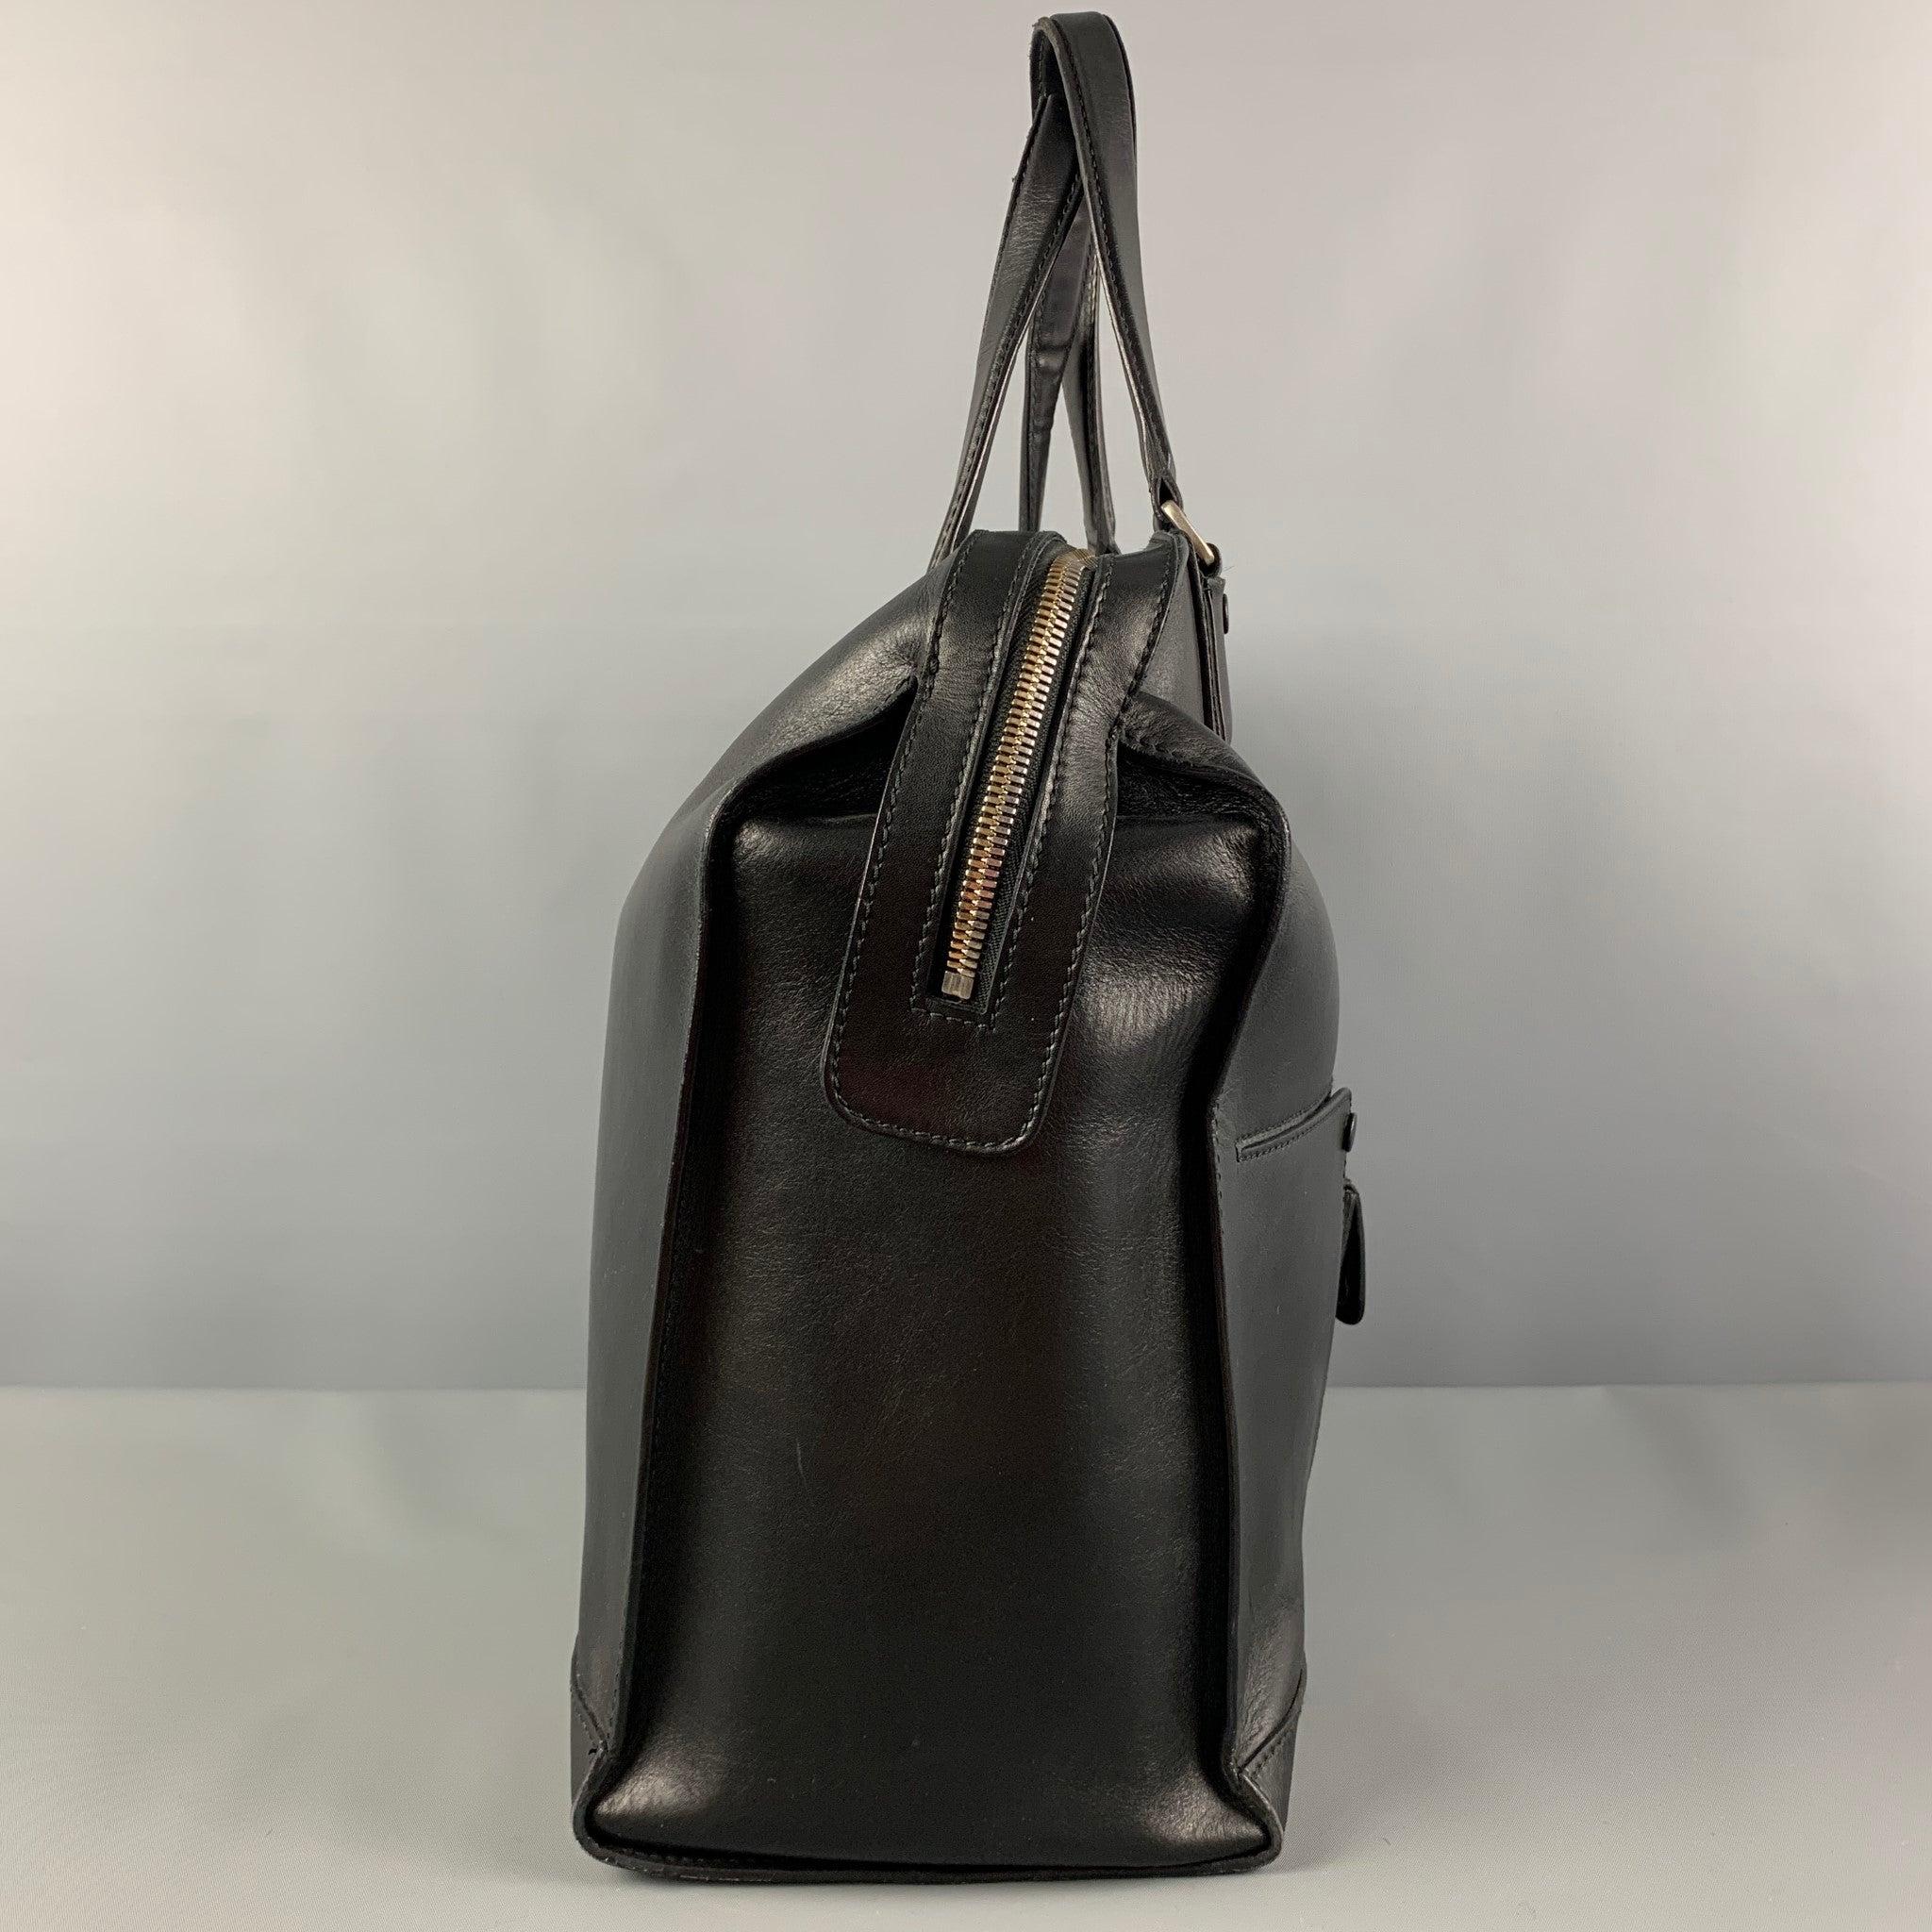 Men's BALLY Black Leather Top Handles Tote Bag For Sale